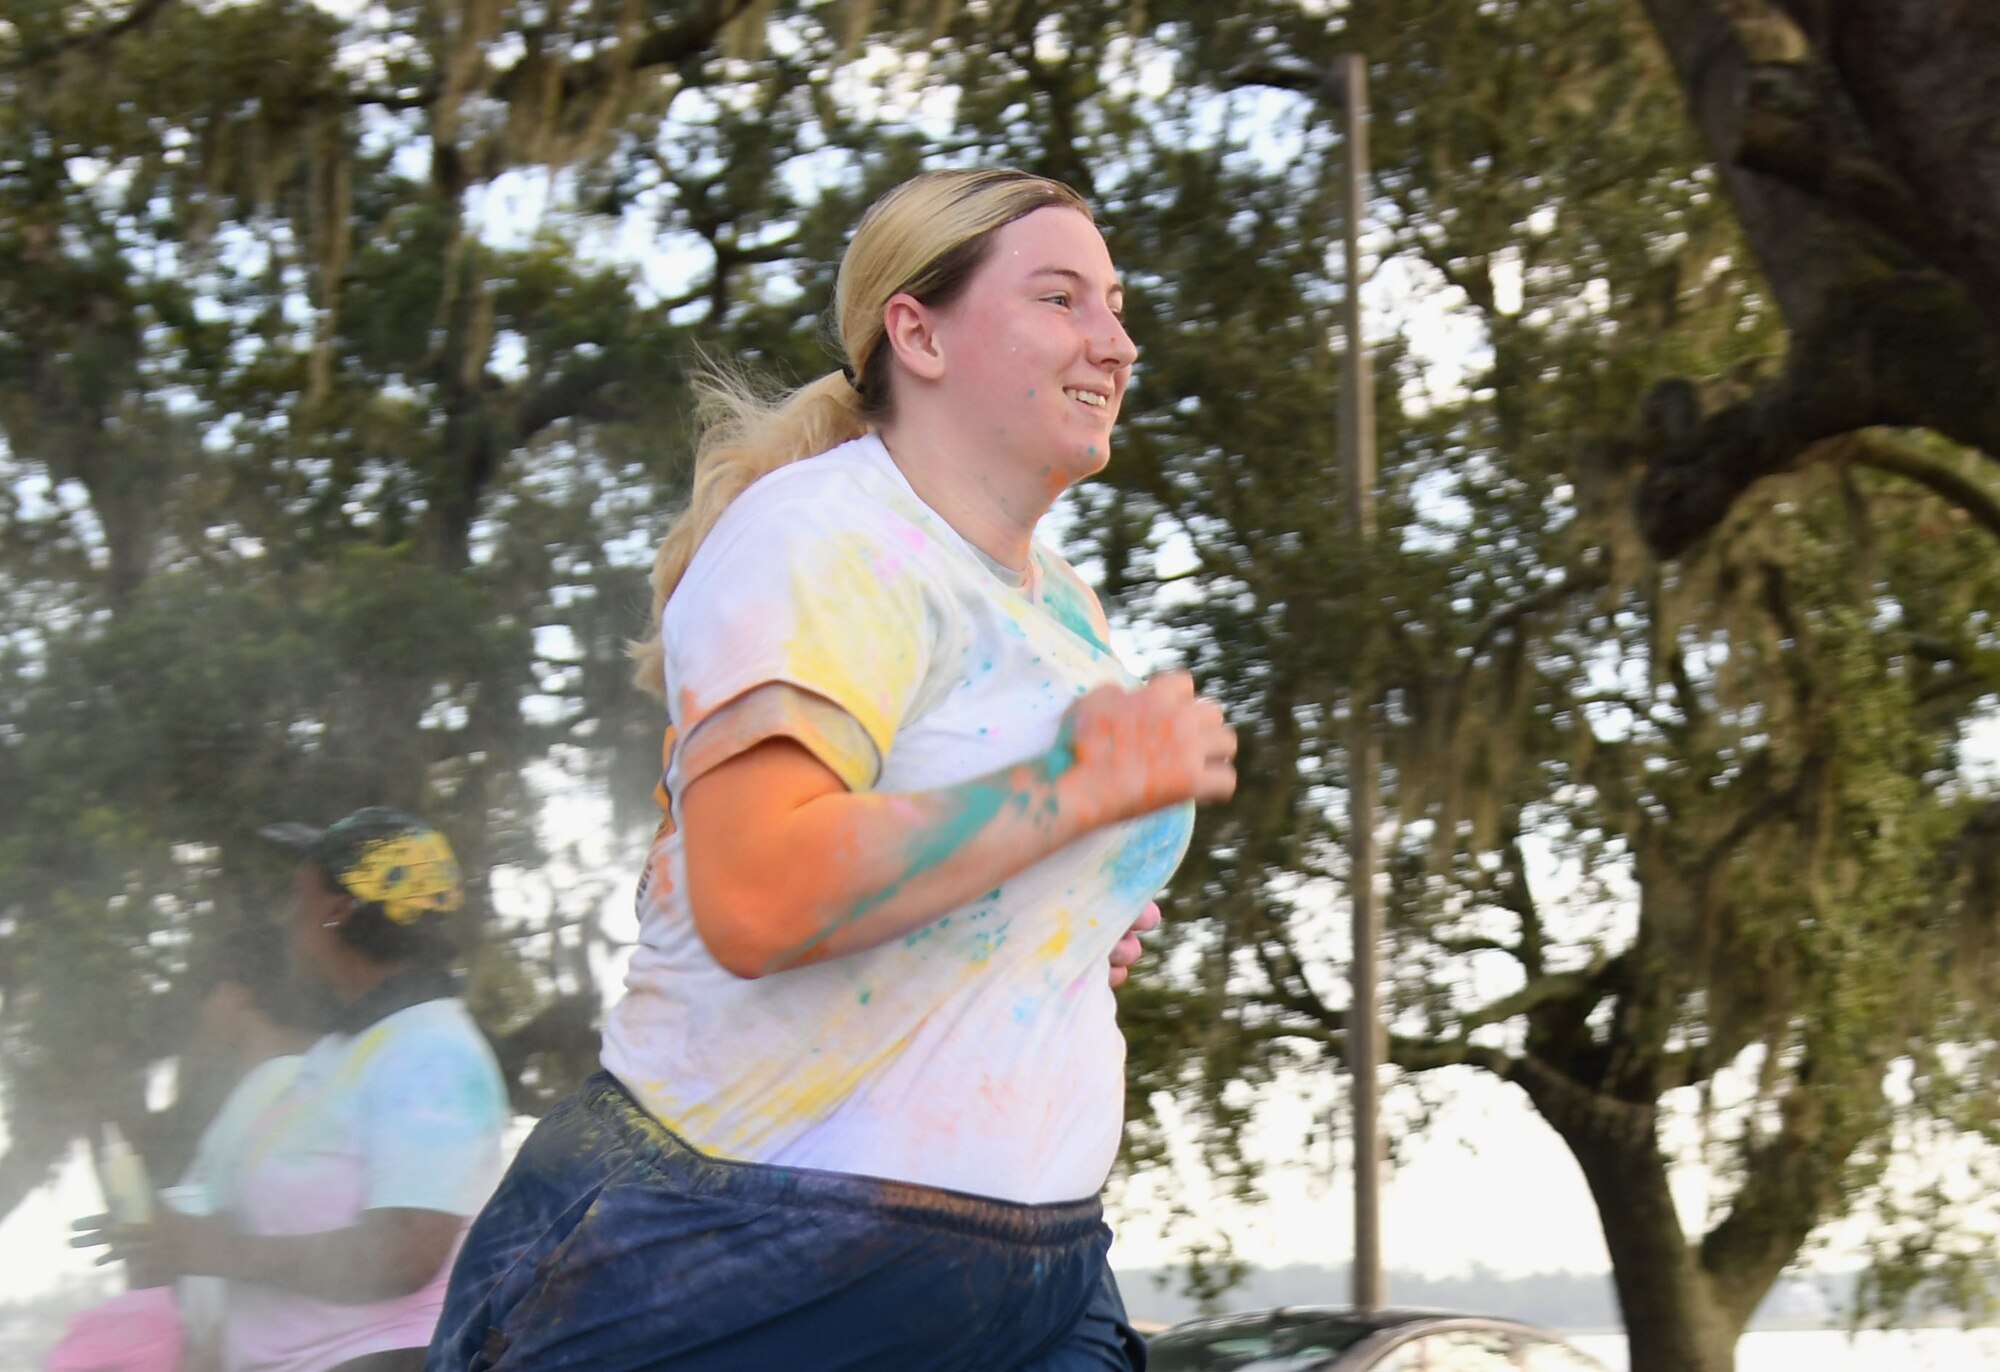 U.S. Air Force Senior Airman Kimberly Mueller, 81st Training Wing command information lead, participates in a 5K Color Run at Keesler Air Force Base, Mississippi, July 15, 2021. Keesler personnel participates in the 5K Color Run at Keesler Air Force Base, Mississippi, July 15, 2021. The run, hosted by the Keesler Airman’s Council, Air Force Sergeants Association and the Wing 5/6, was held in recognition of suicide awareness. (U.S. Air Force photo by Kemberly Groue)